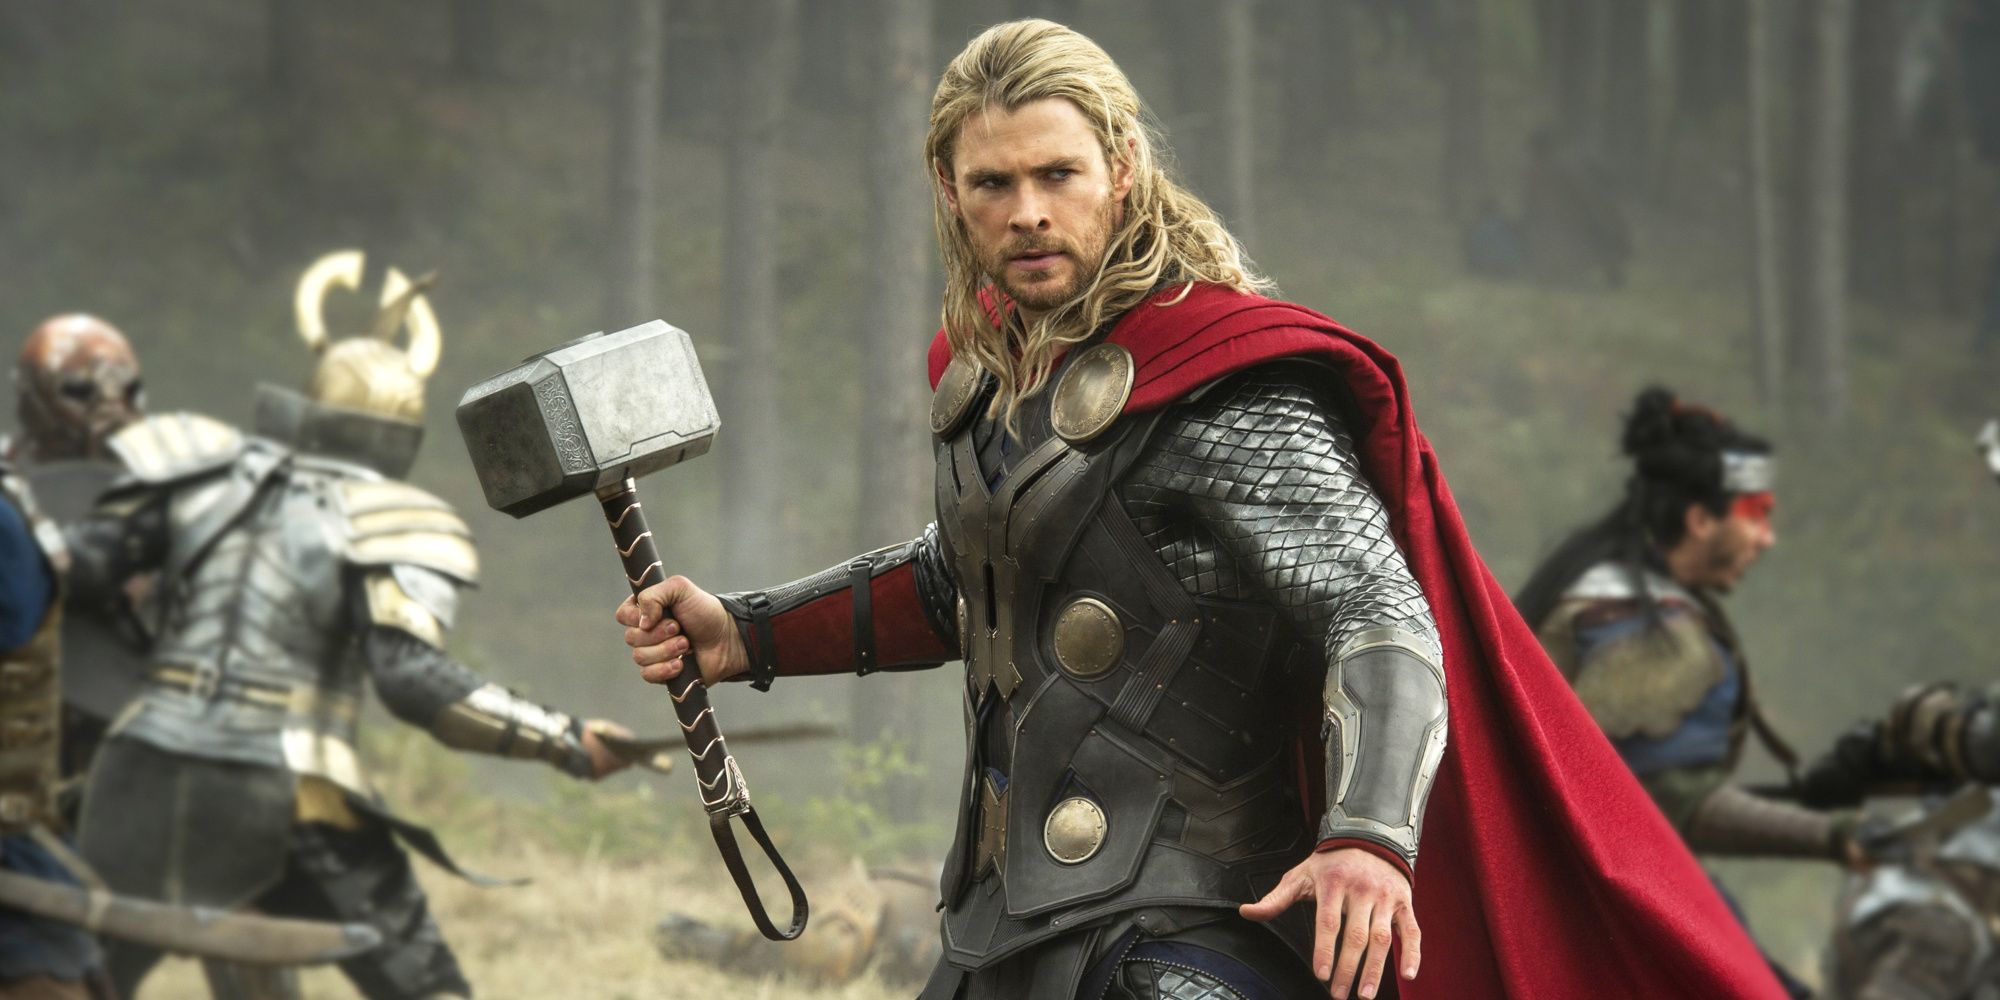 Thor wielding his hammer